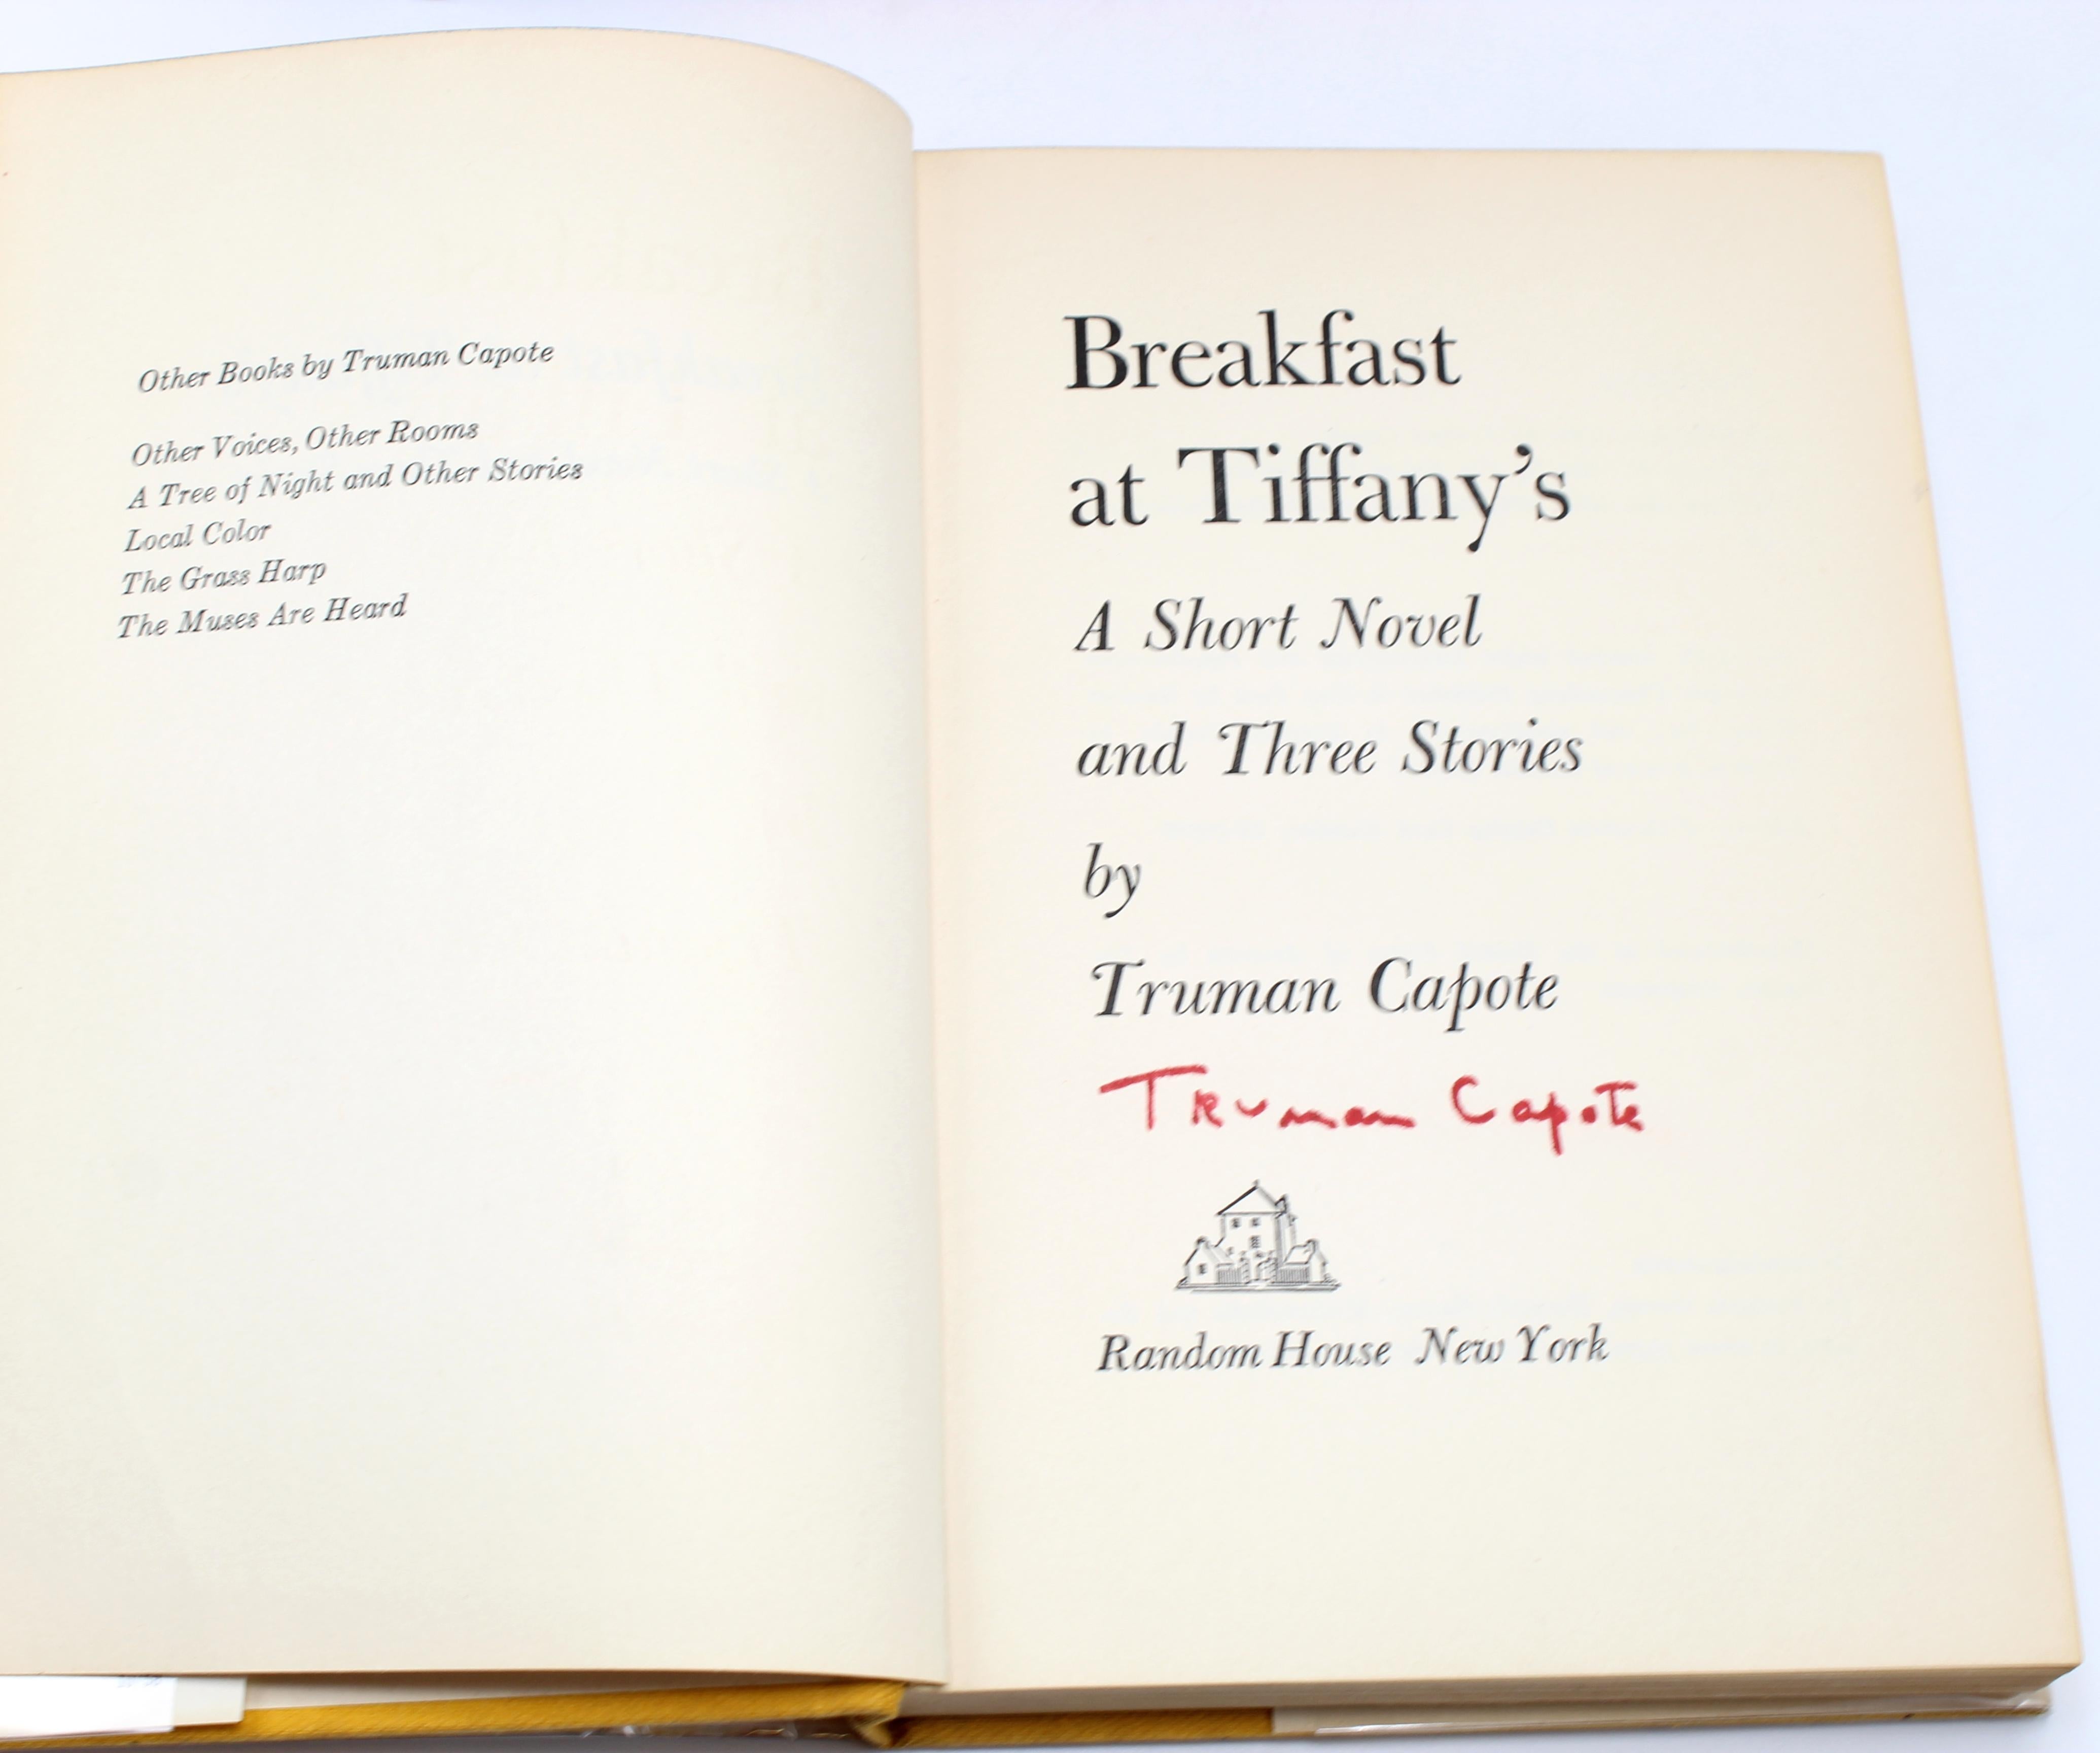 Capote, Truman. Breakfast at Tiffany's: A short novel and three stories. New York: Random House, 1958. Third edition. Signed by Capote on the title page. In the original publisher’s orange dust jacket and yellow cloth binding with partial black